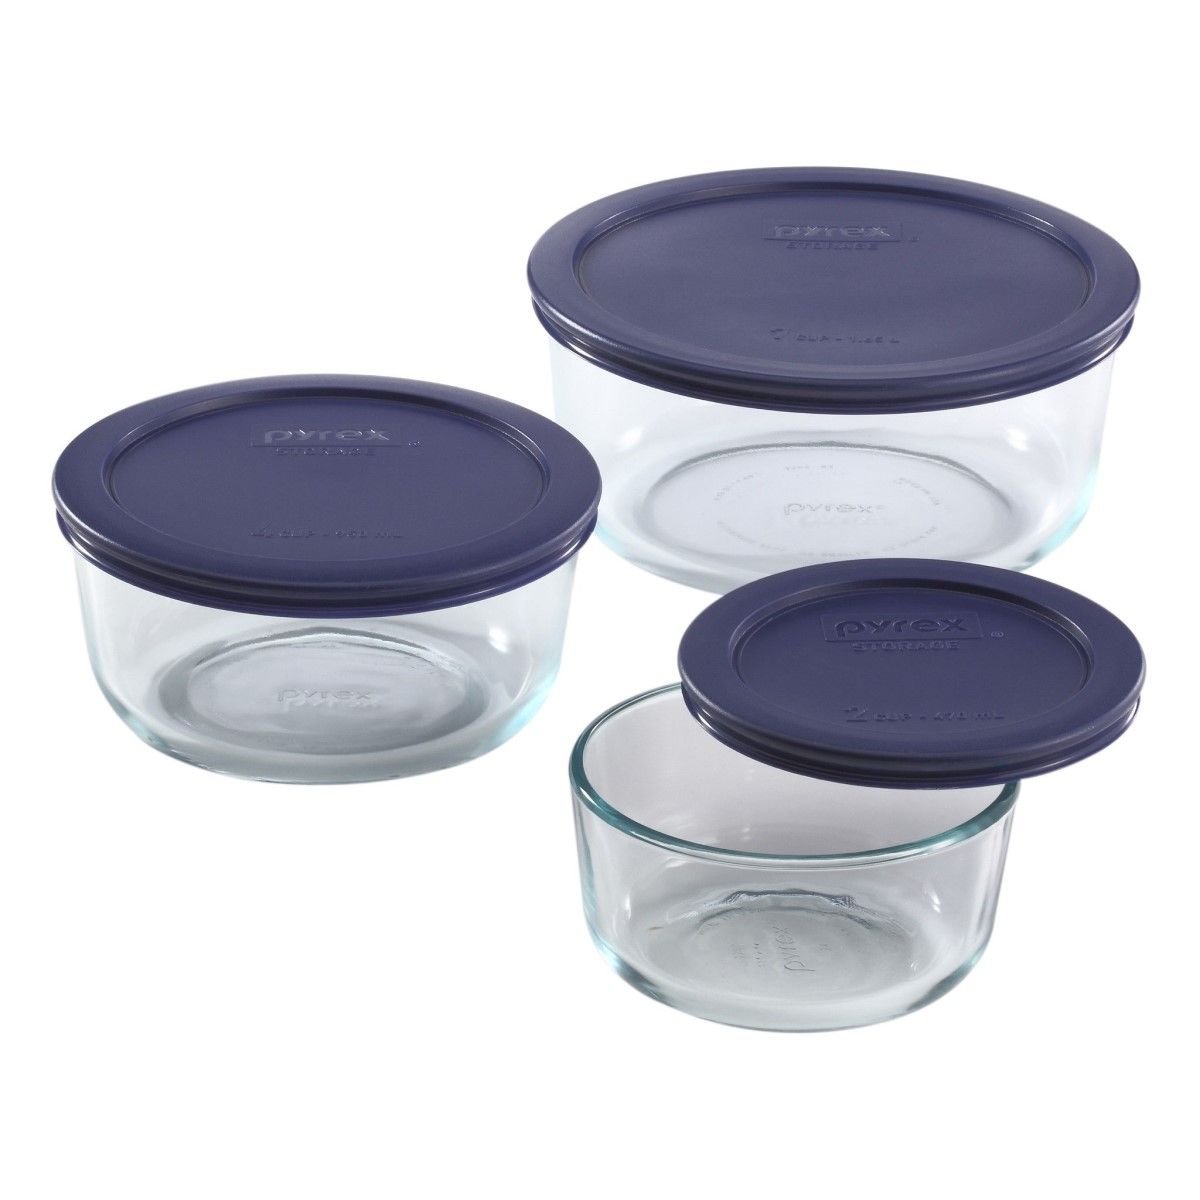  Utensilux Pyrex 8 Peice Round Bundle 4 Glass Storage Containers  With Lids, 7-cup, 4-cup, 2-cup, & 1-cup Meal Prep Containers With Lid,  Bpa-free Lid, Dishwasher Bundle: Home & Kitchen